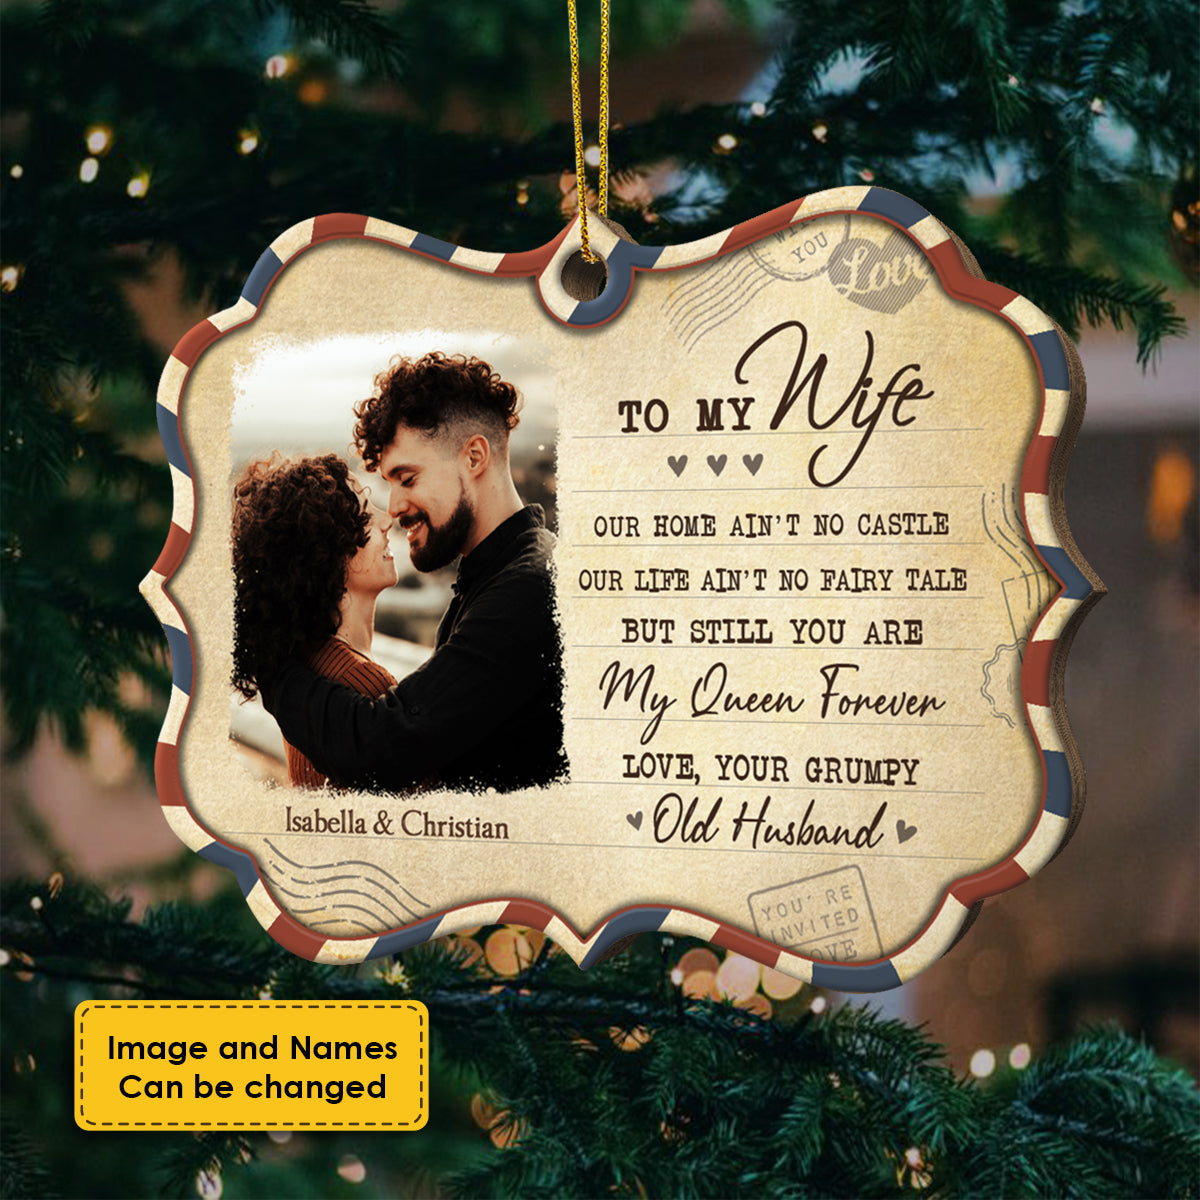 What Will Matter Is That I Had You And You Had Me - Upload Image, Gift For Couples - Personalized Shaped Ornament